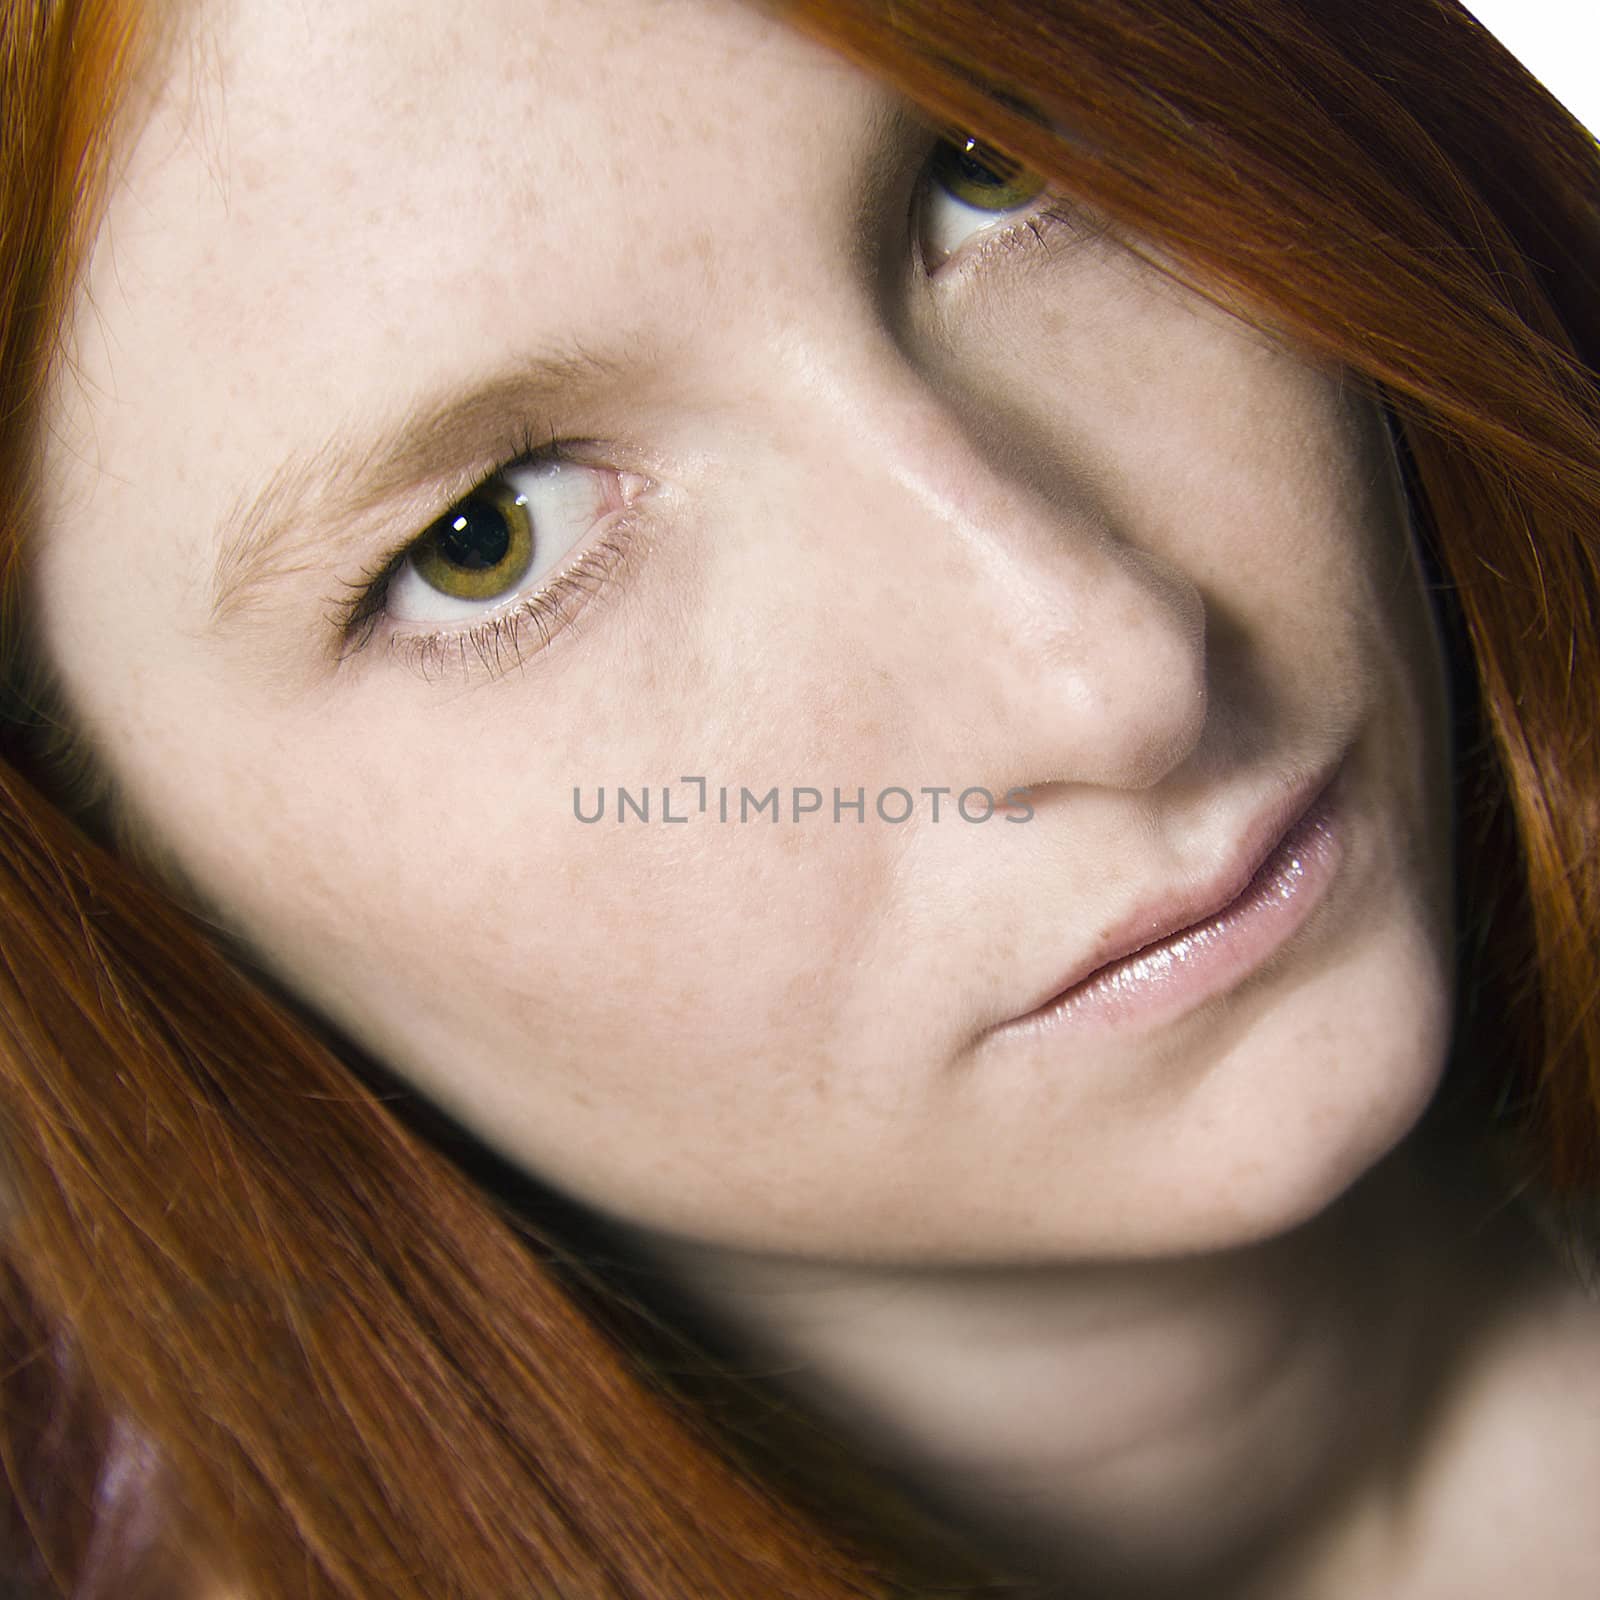 Studio portrait of a natural redhead who is waiting for an answer